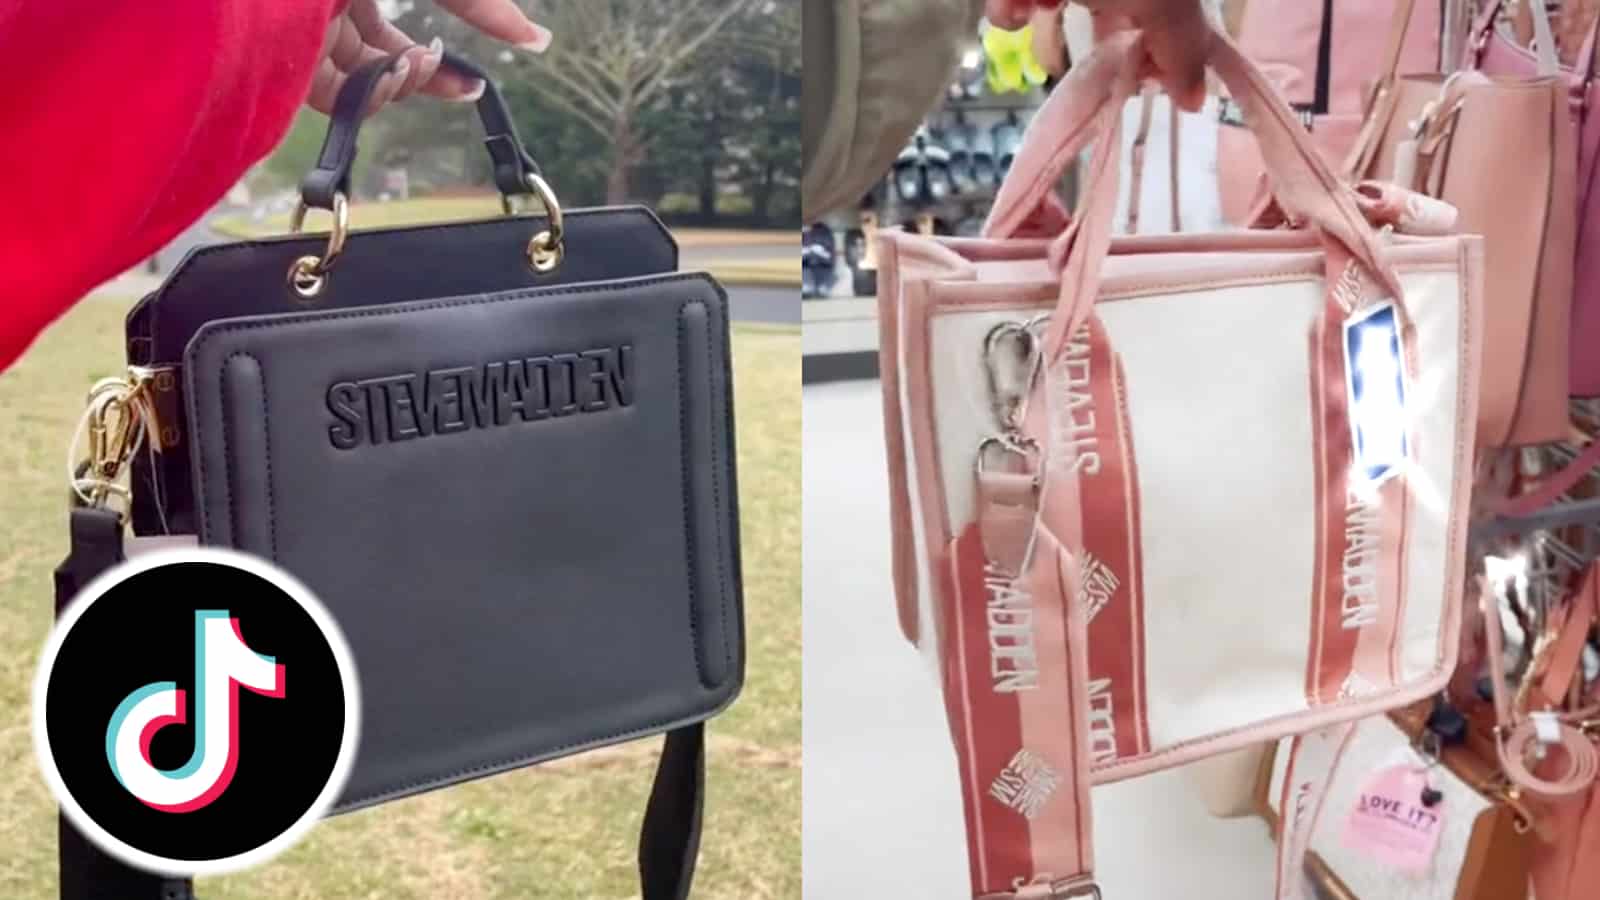 Black and pink Steve Madden bags next to the TikTok logo